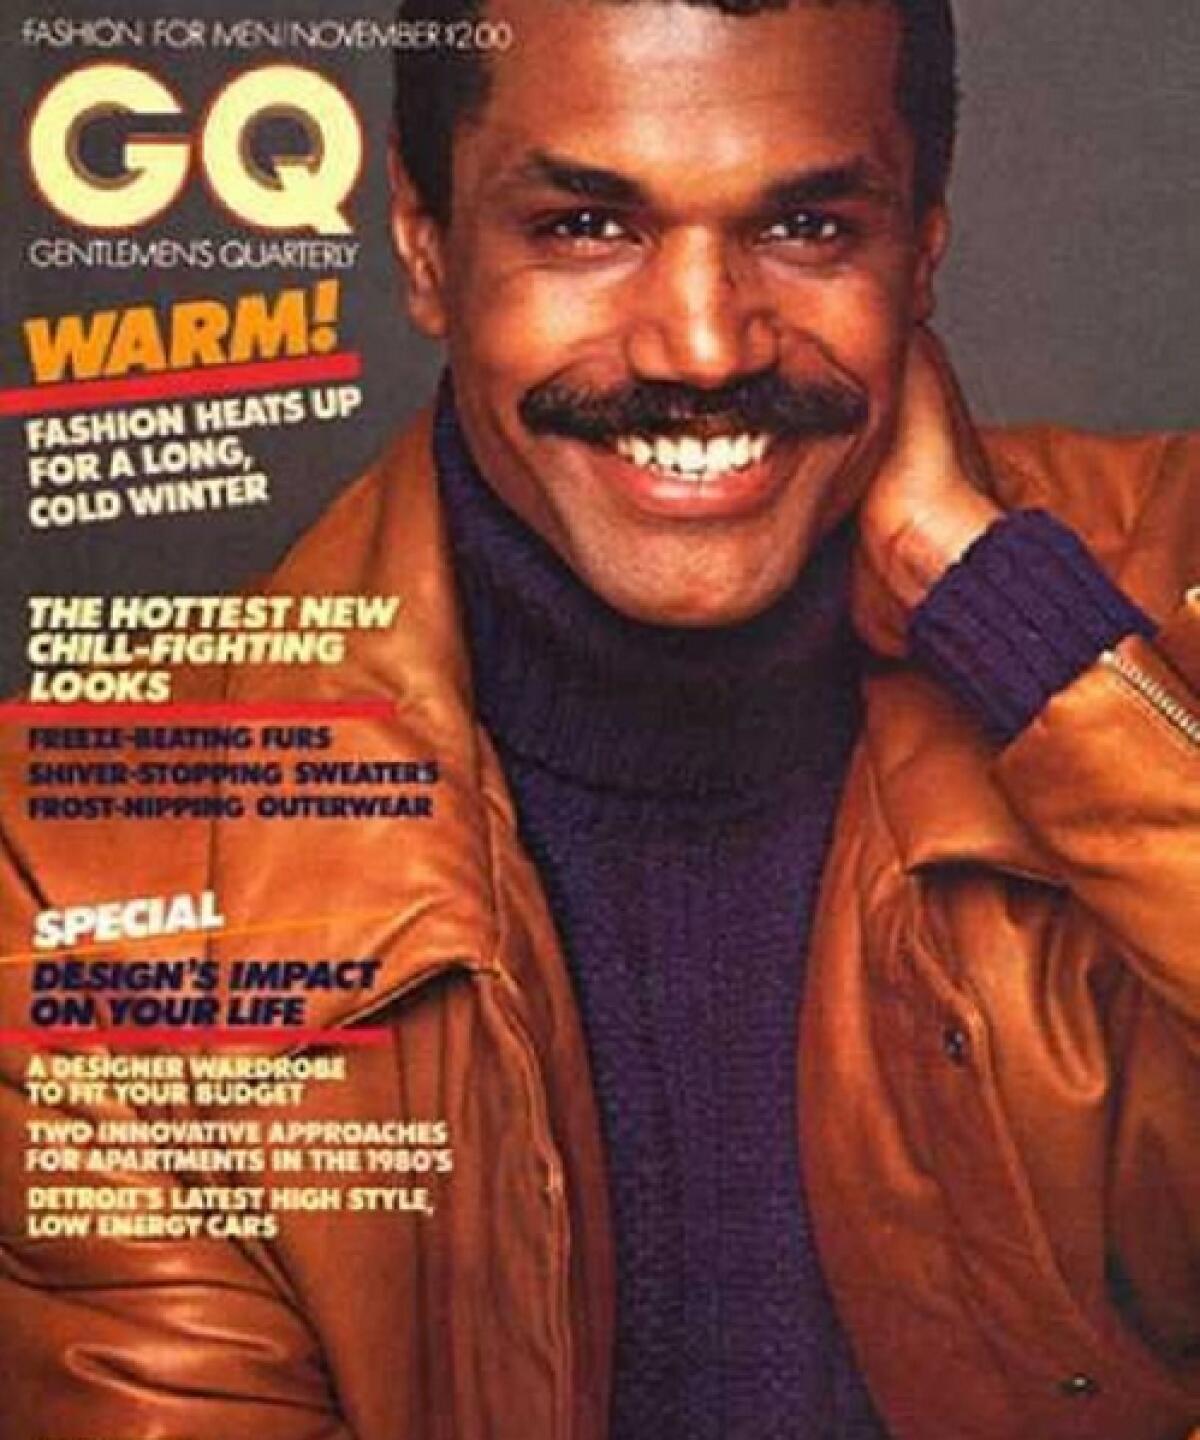 A GQ magazine cover featuring model Renauld White wearing a brown leather jacket and deep-purple turtleneck sweater